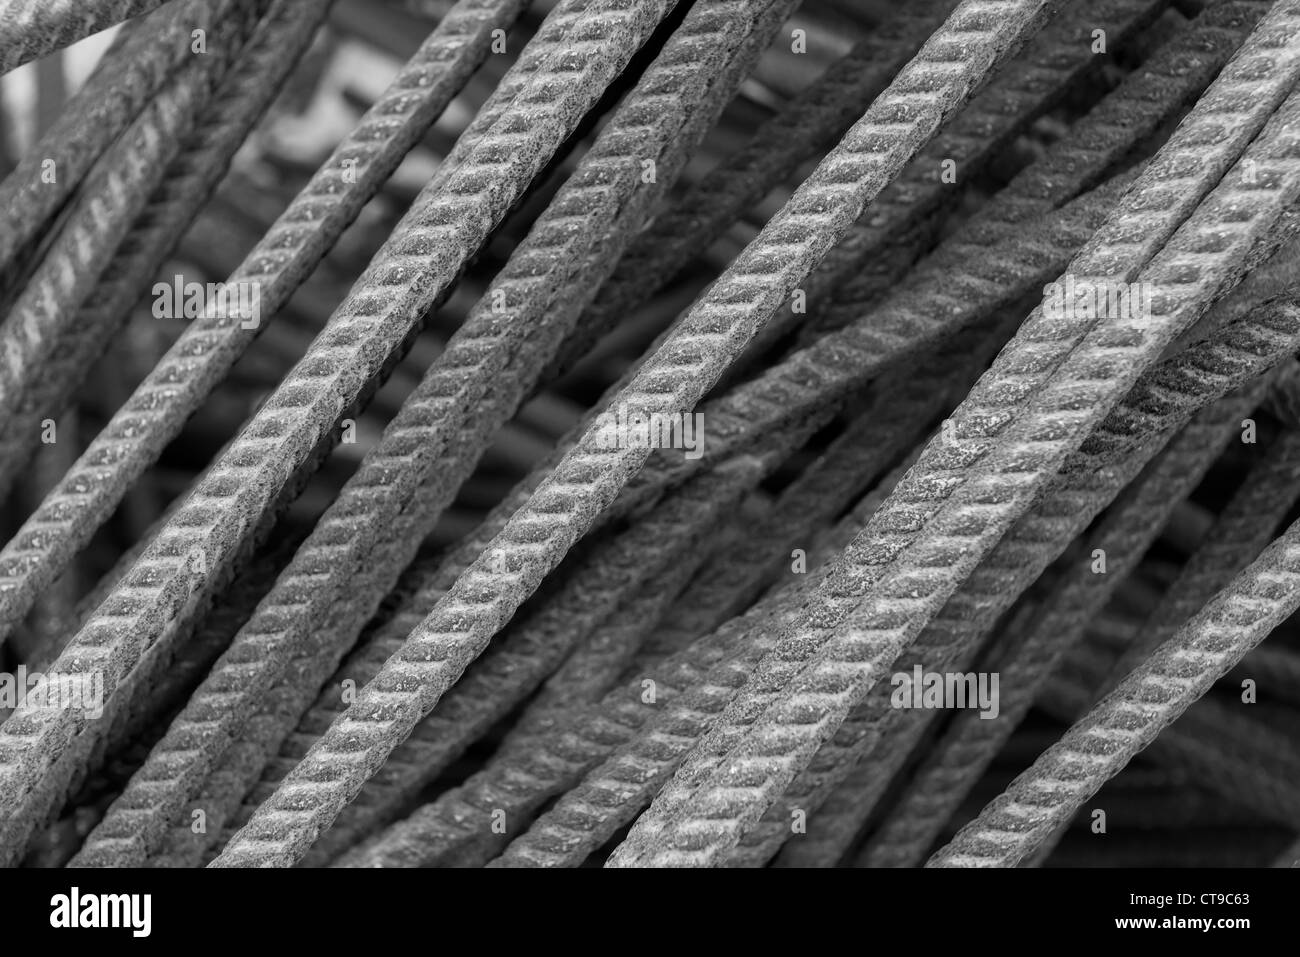 Iron rods in a building site Stock Photo